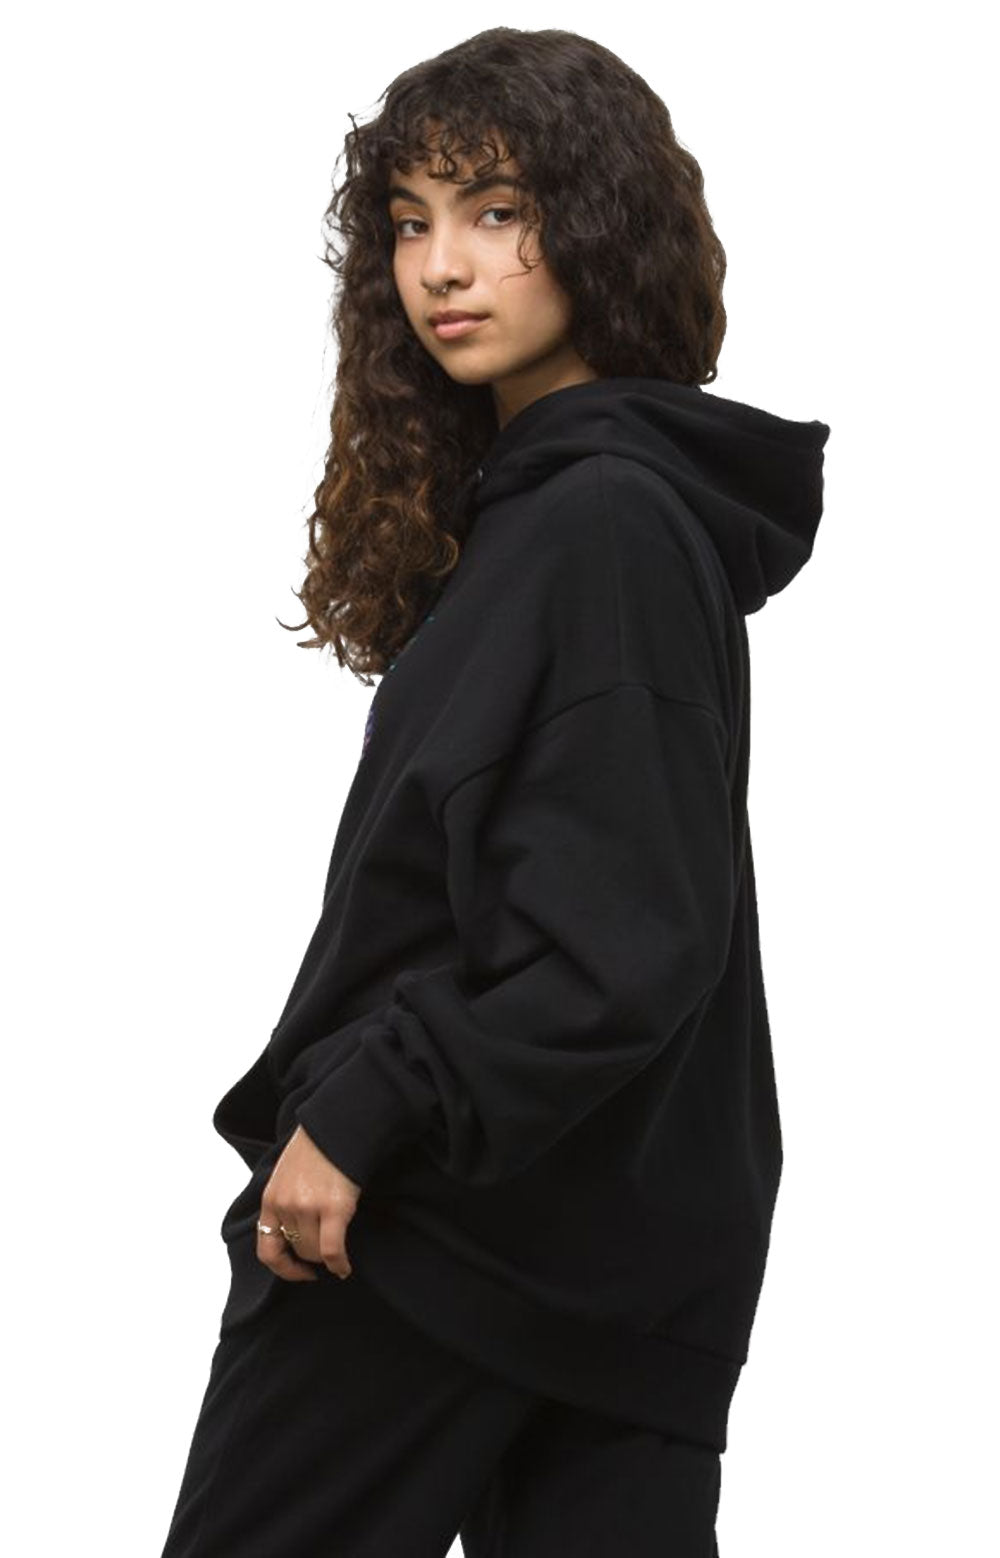 Cultivate Care Pullover Hoodie - Black